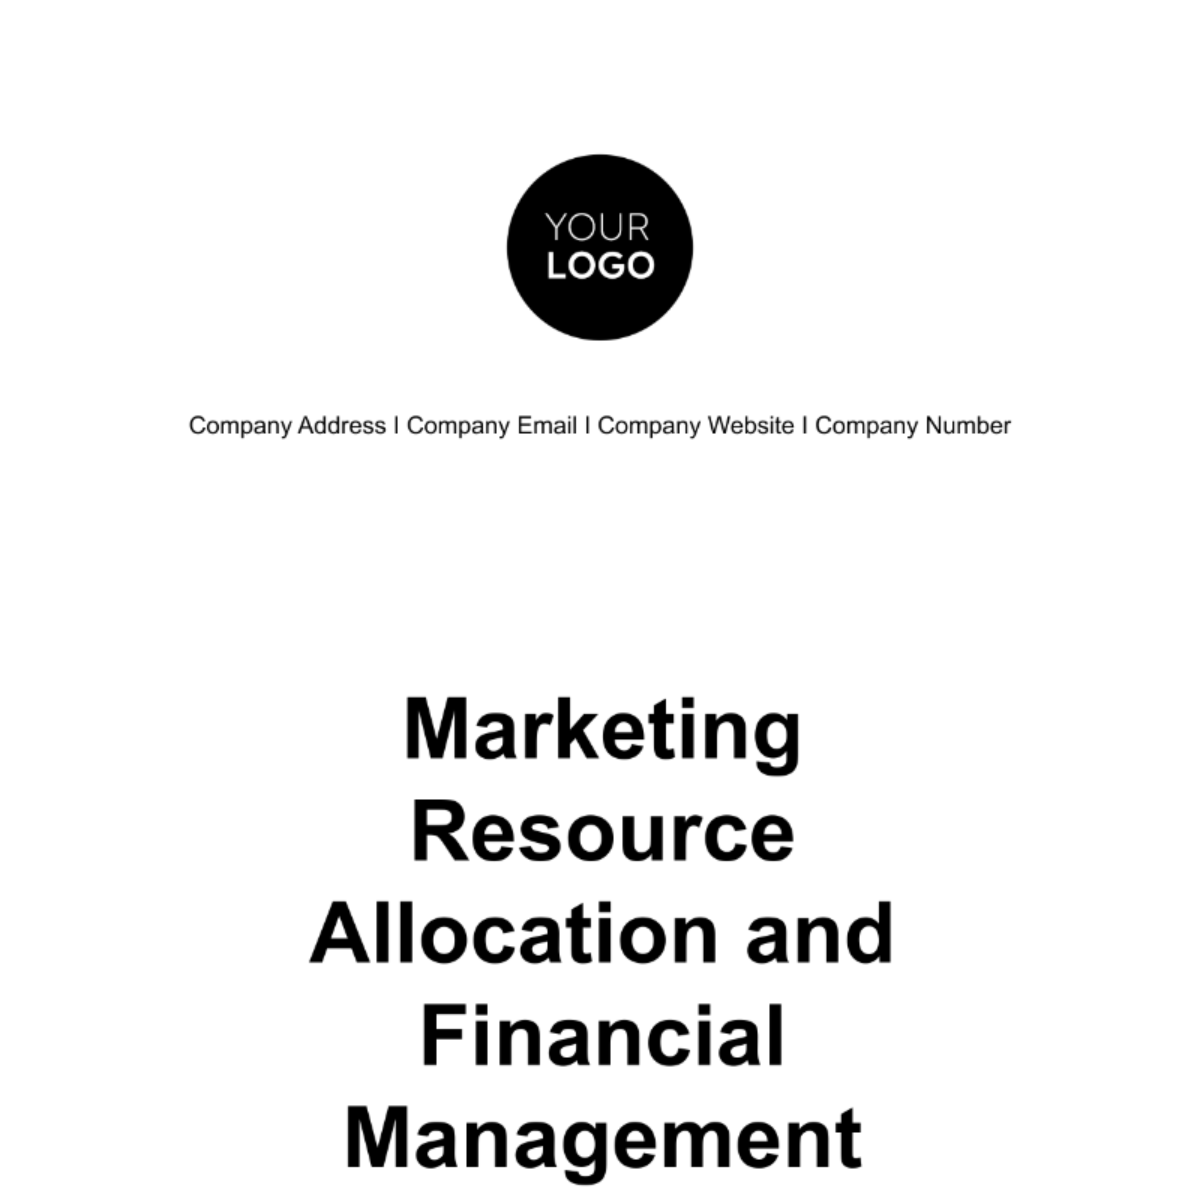 Marketing Resource Allocation and Financial Management Template